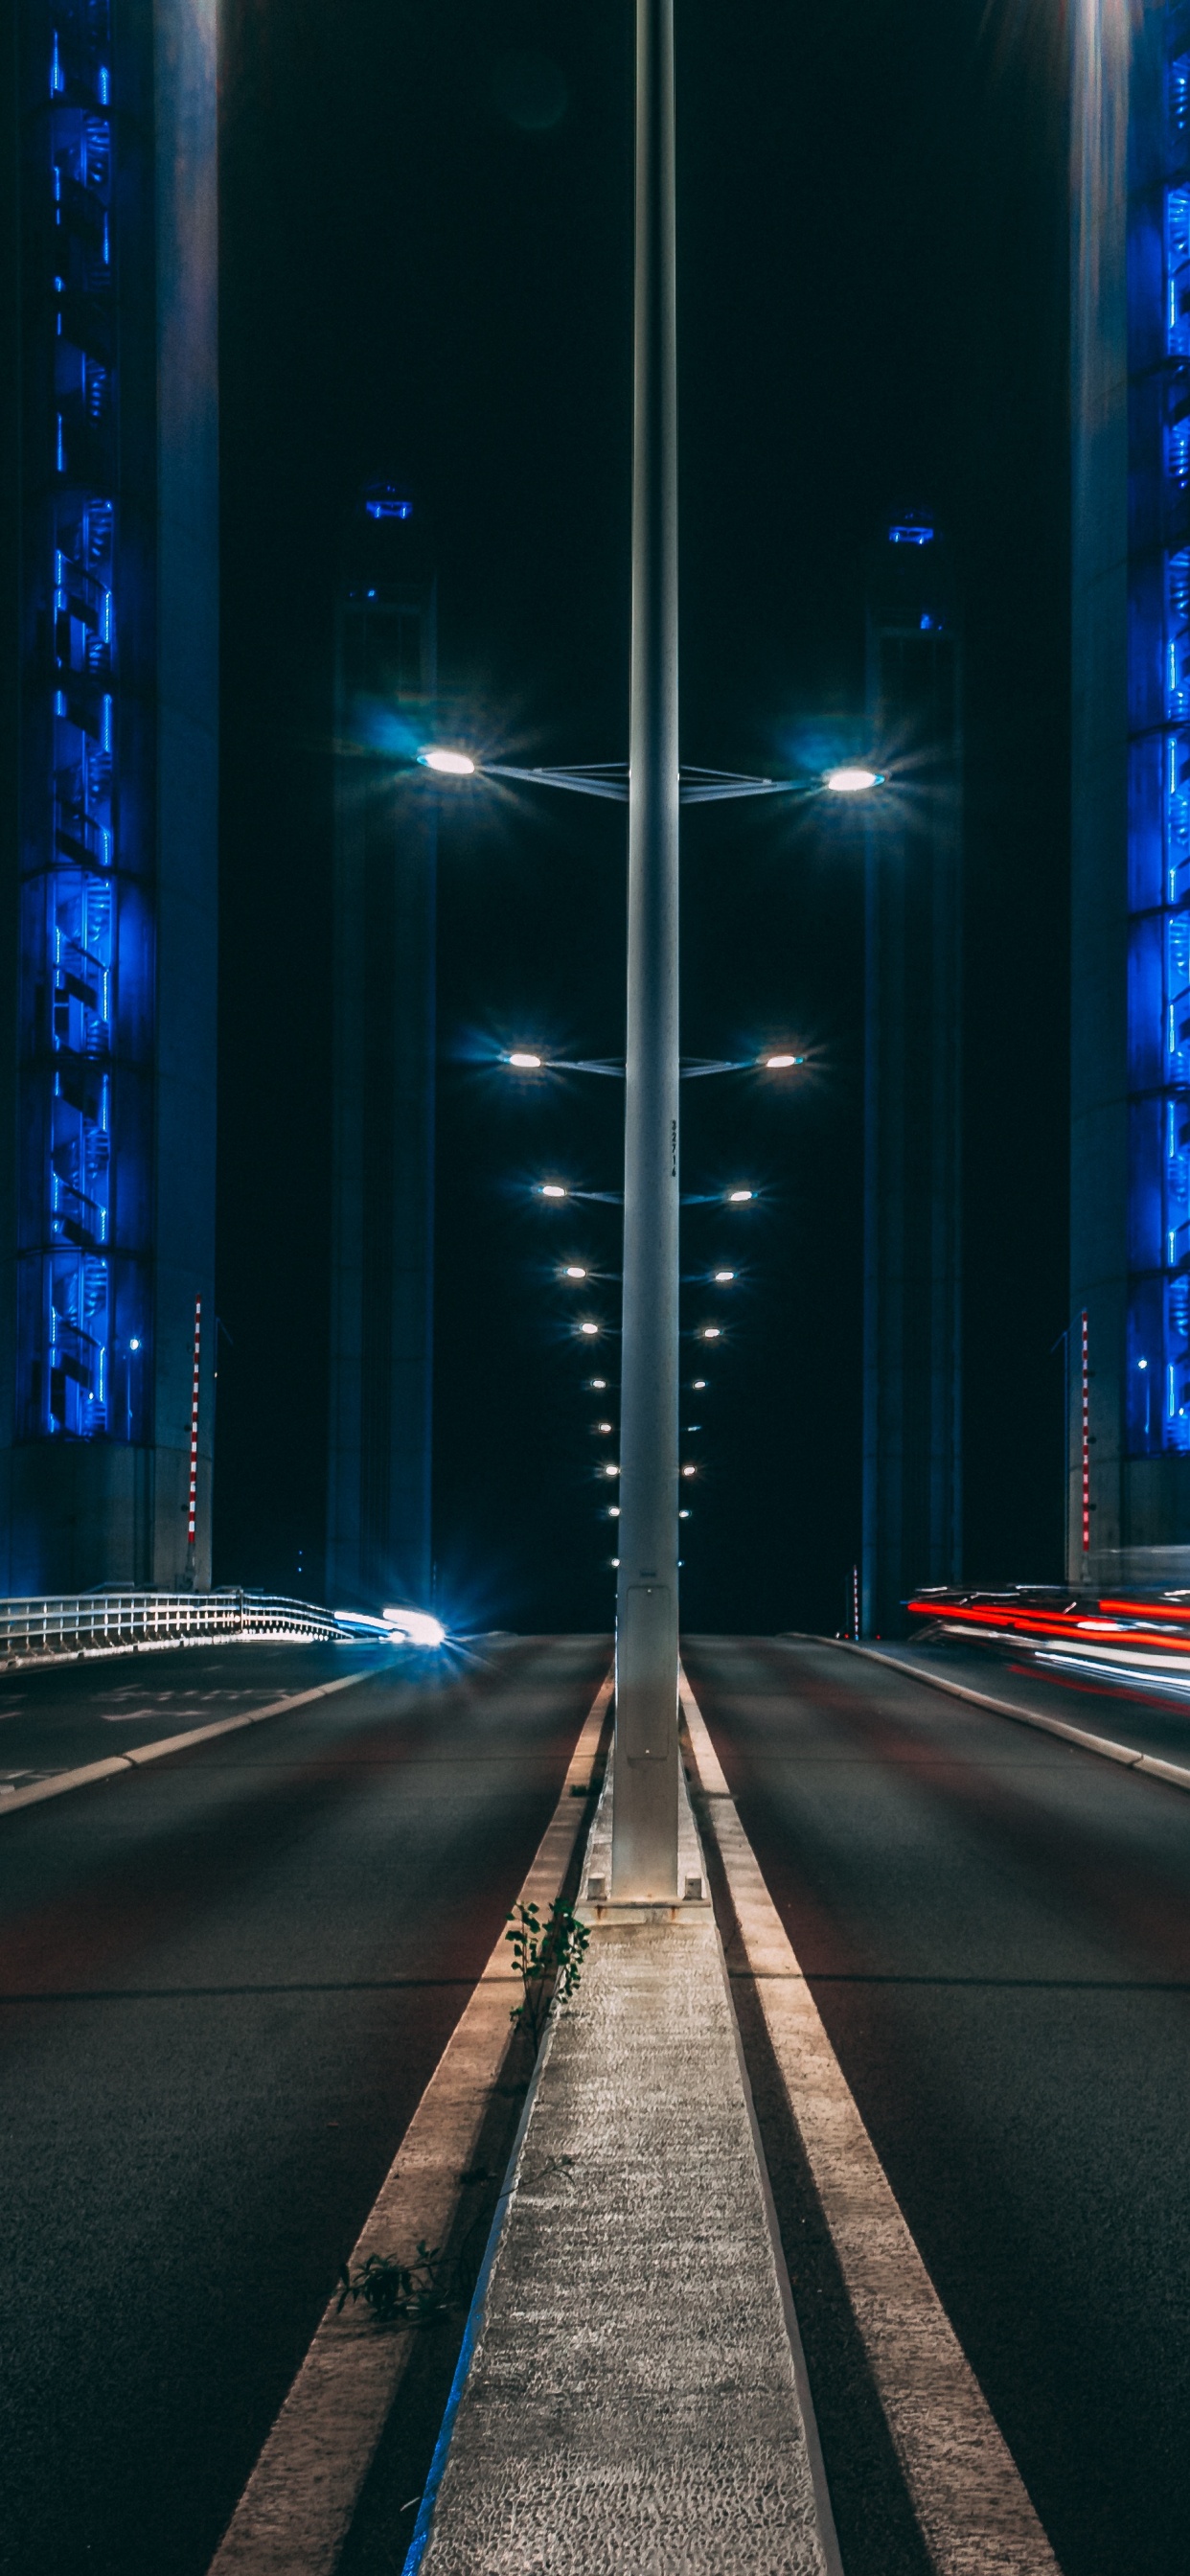 Time Lapse Photography of Cars on Road During Night Time. Wallpaper in 1242x2688 Resolution